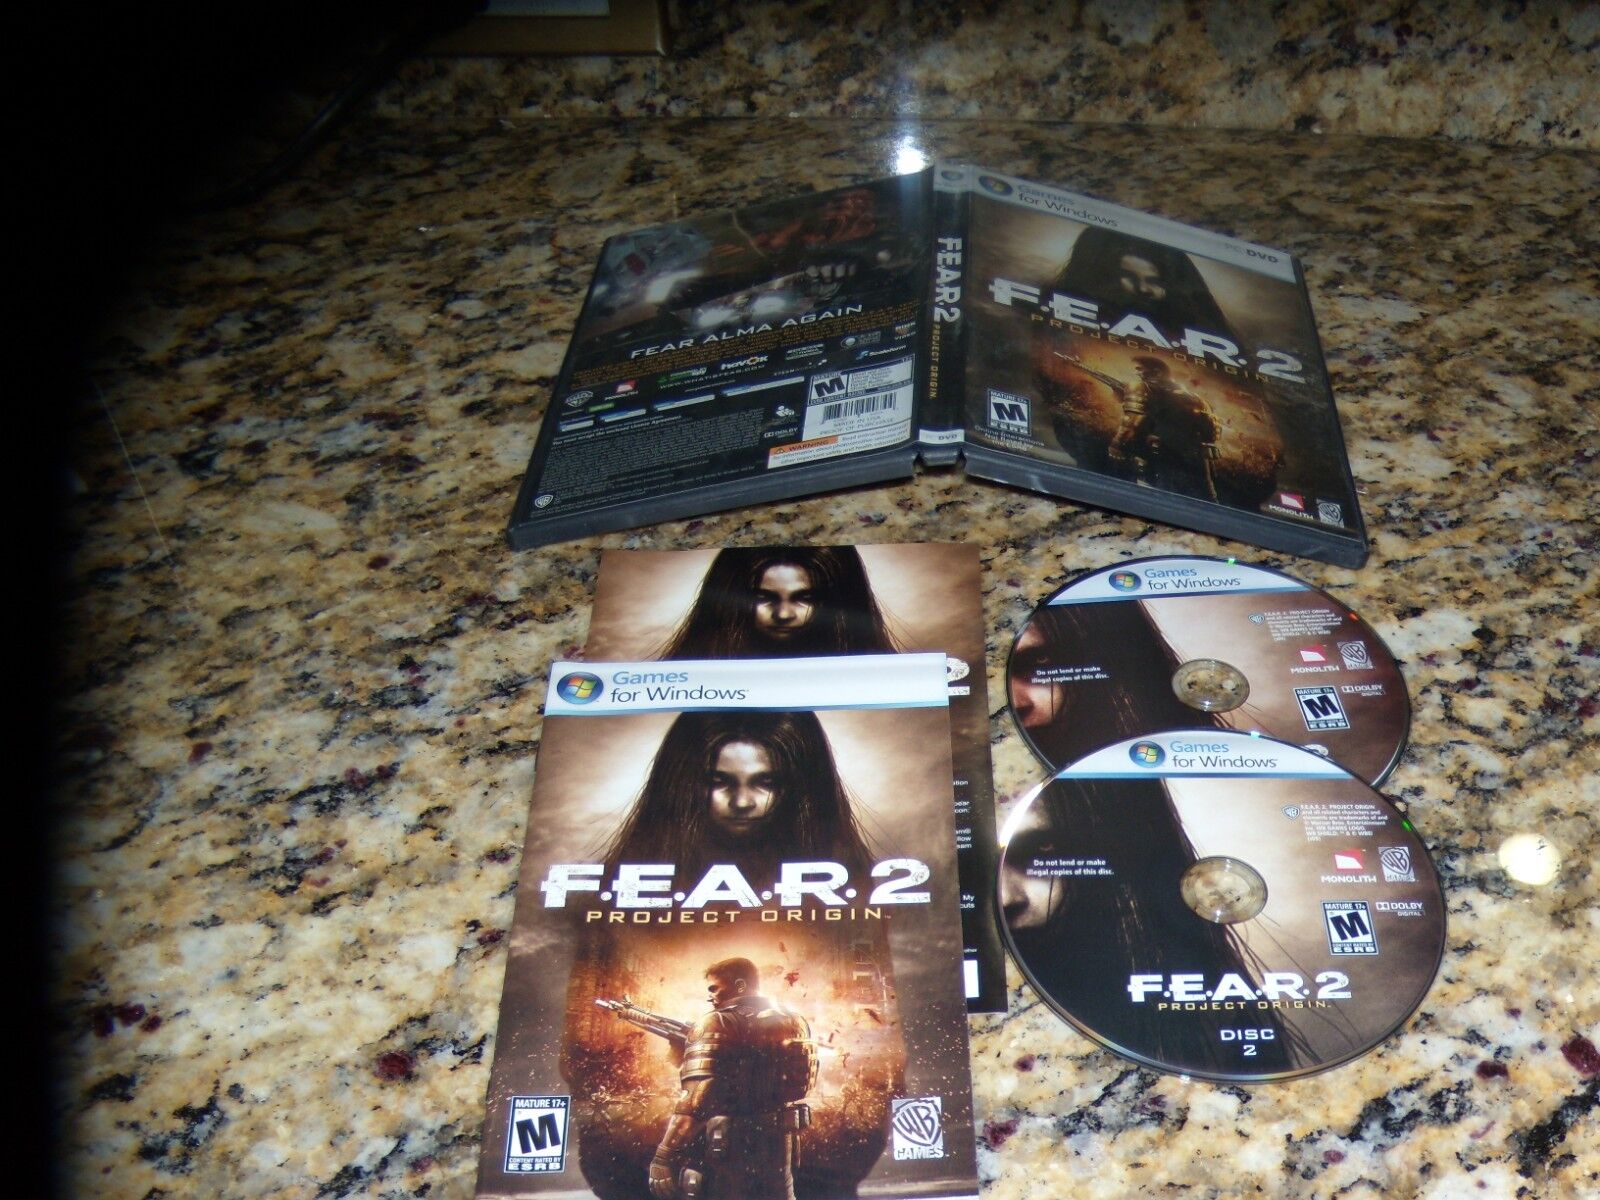 FEAR 2 Project Origin (PC, 2009) Near Mint Game with manual Replacement disks